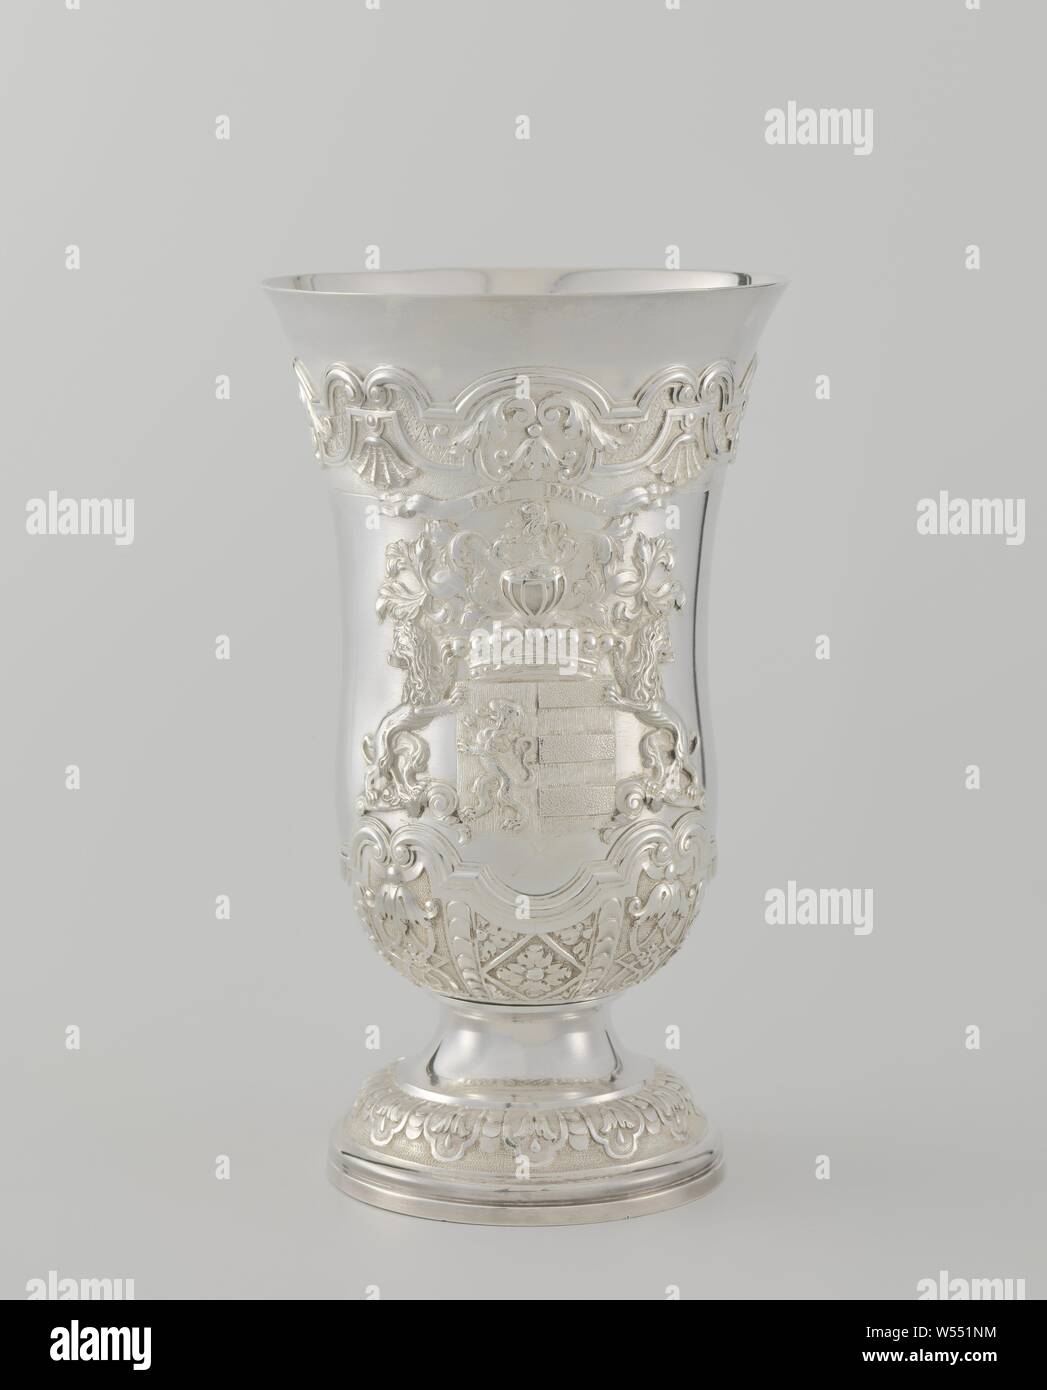 Communion set Supper cup, Supper cup of silver. Decorated with Louis XIV ornament borders with palmettes, chalices, leaf, grid and band work. With appliqued weapon from Philip Diodati, ornaments, art, Dirk Wor (attributed to), Dordrecht, 1736, silver (metal), h 20.5 cm × d 12 cm Stock Photo